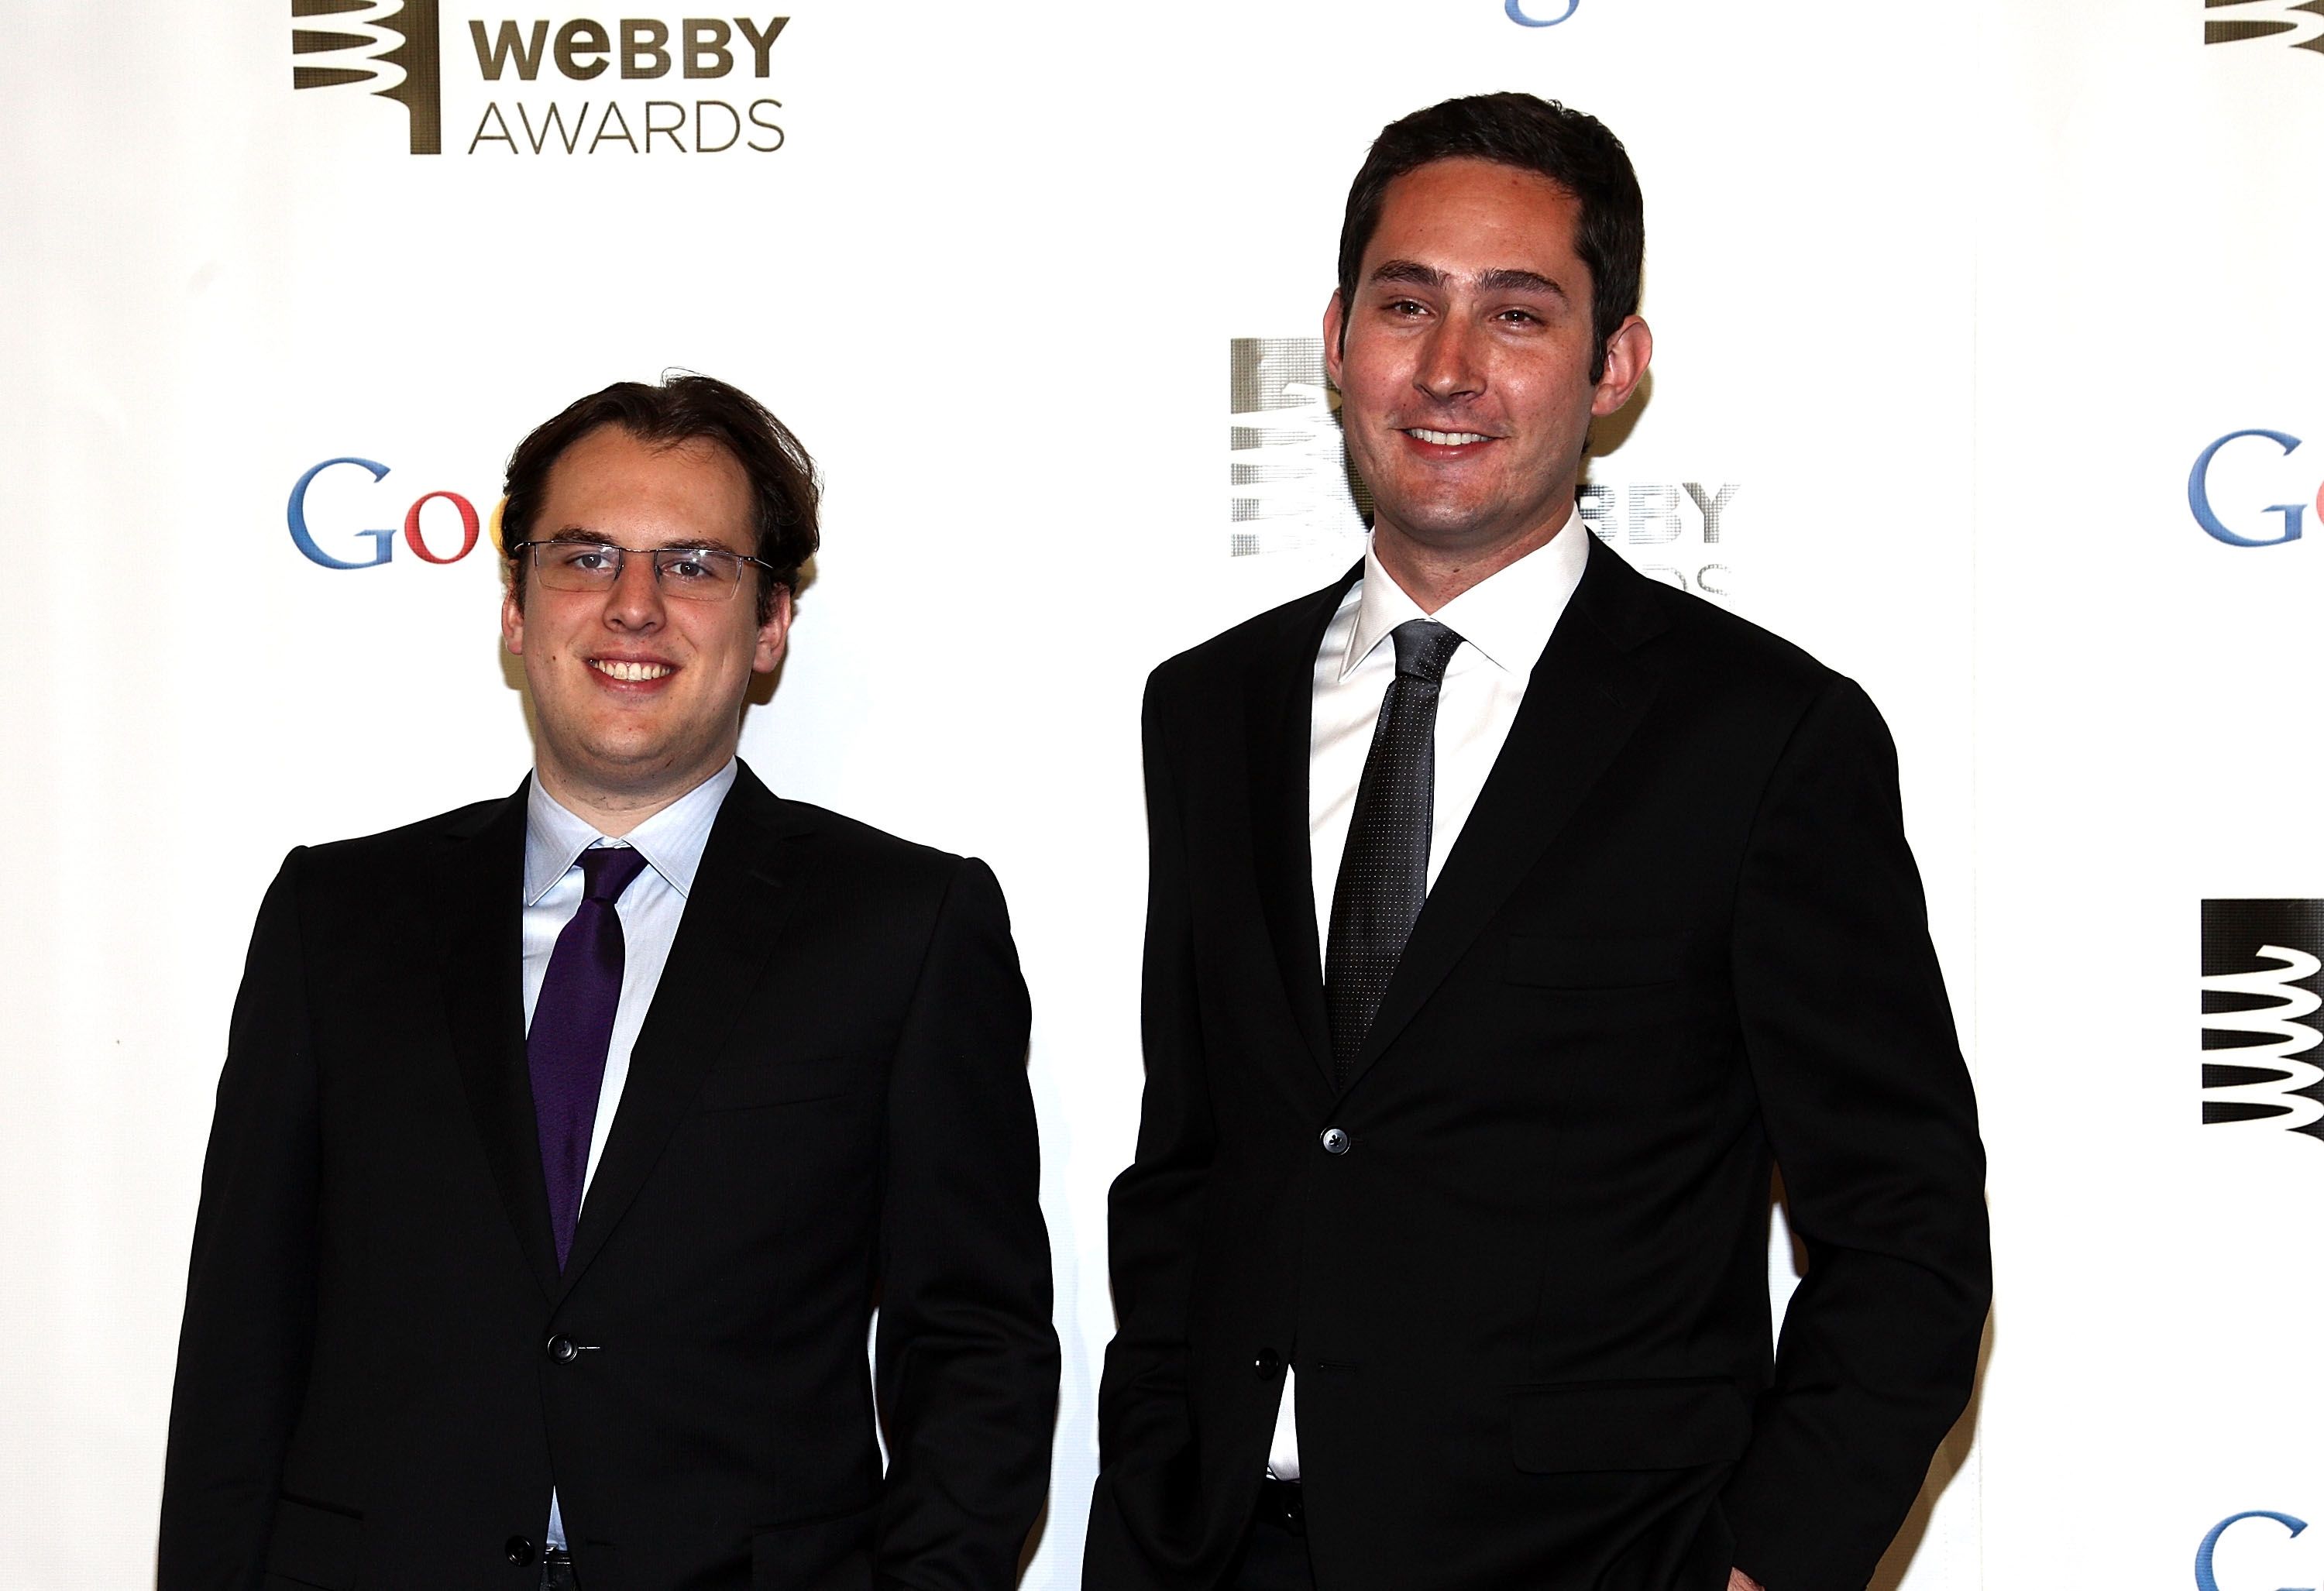 NEW YORK, NY - MAY 21: (L-R) Kevin Systrom and Mike Krieger attend the 16th Annual Webby Awards at Hammerstein Ballroom on May 21, 2012 in New York City. (Photo by Paul Zimmerman/Getty Images)